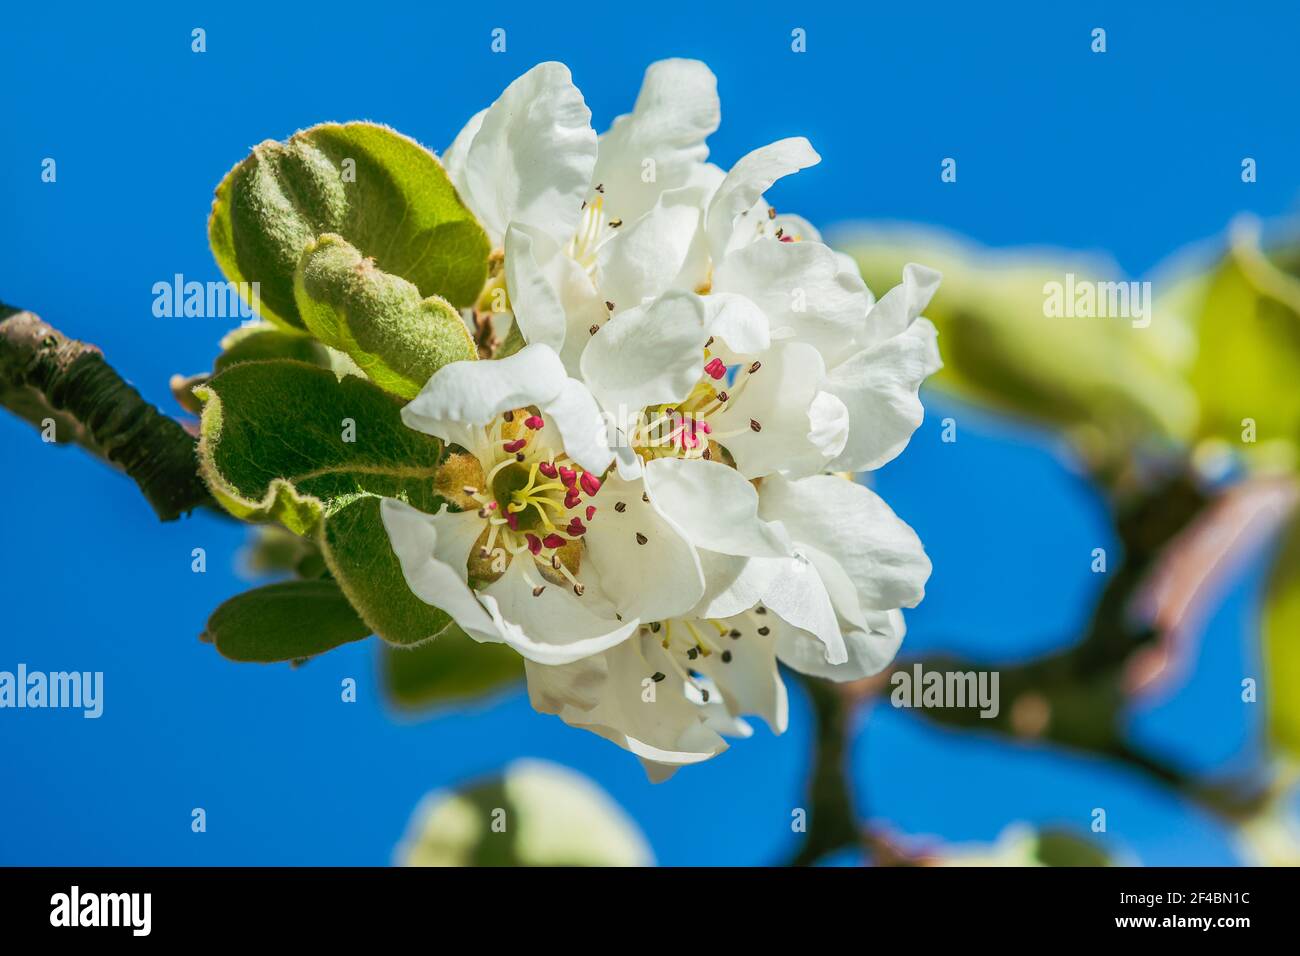 Opened white flowers of an apple tree. Branch with several flowers from the fruit tree in springtime in sunshine. Petals, flower stems and pistils on Stock Photo